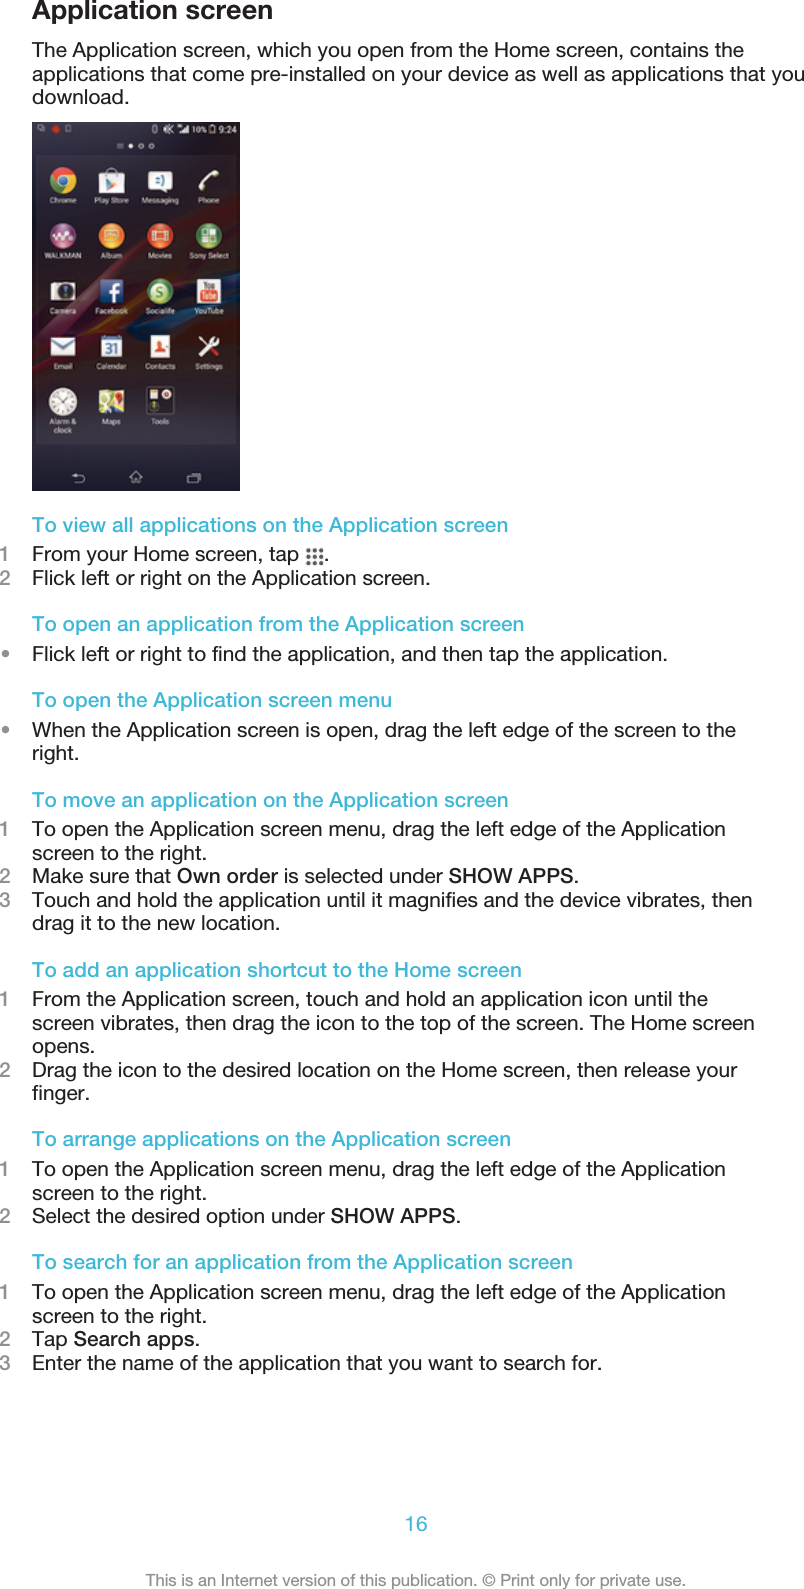 Application screenThe Application screen, which you open from the Home screen, contains theapplications that come pre-installed on your device as well as applications that youdownload.To view all applications on the Application screen1From your Home screen, tap  .2Flick left or right on the Application screen.To open an application from the Application screen•Flick left or right to find the application, and then tap the application.To open the Application screen menu•When the Application screen is open, drag the left edge of the screen to theright.To move an application on the Application screen1To open the Application screen menu, drag the left edge of the Applicationscreen to the right.2Make sure that Own order is selected under SHOW APPS.3Touch and hold the application until it magnifies and the device vibrates, thendrag it to the new location.To add an application shortcut to the Home screen1From the Application screen, touch and hold an application icon until thescreen vibrates, then drag the icon to the top of the screen. The Home screenopens.2Drag the icon to the desired location on the Home screen, then release yourfinger.To arrange applications on the Application screen1To open the Application screen menu, drag the left edge of the Applicationscreen to the right.2Select the desired option under SHOW APPS.To search for an application from the Application screen1To open the Application screen menu, drag the left edge of the Applicationscreen to the right.2Tap Search apps.3Enter the name of the application that you want to search for.16This is an Internet version of this publication. © Print only for private use.